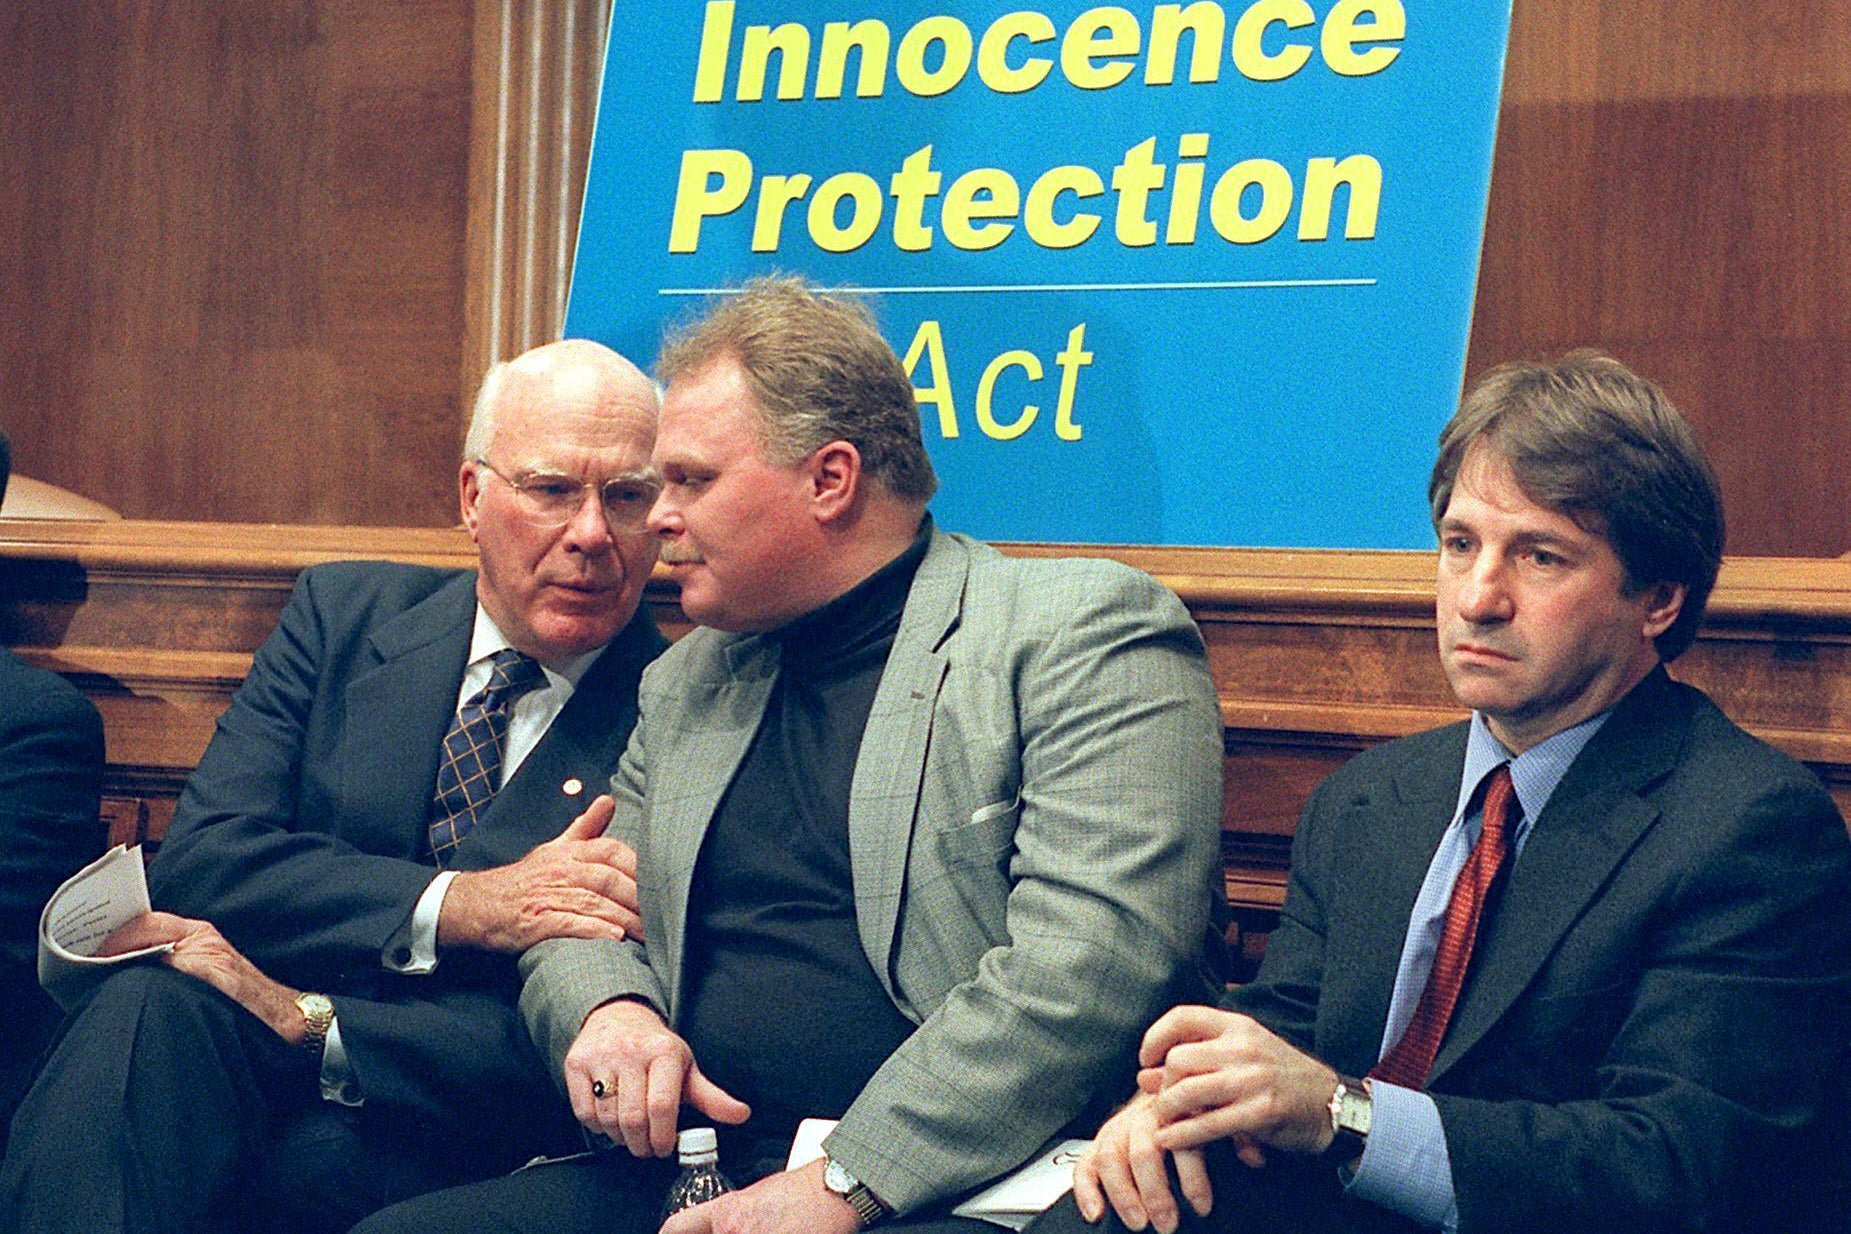 Leahy pulls Bloodsworth's arm and Scheck stares straight ahead.